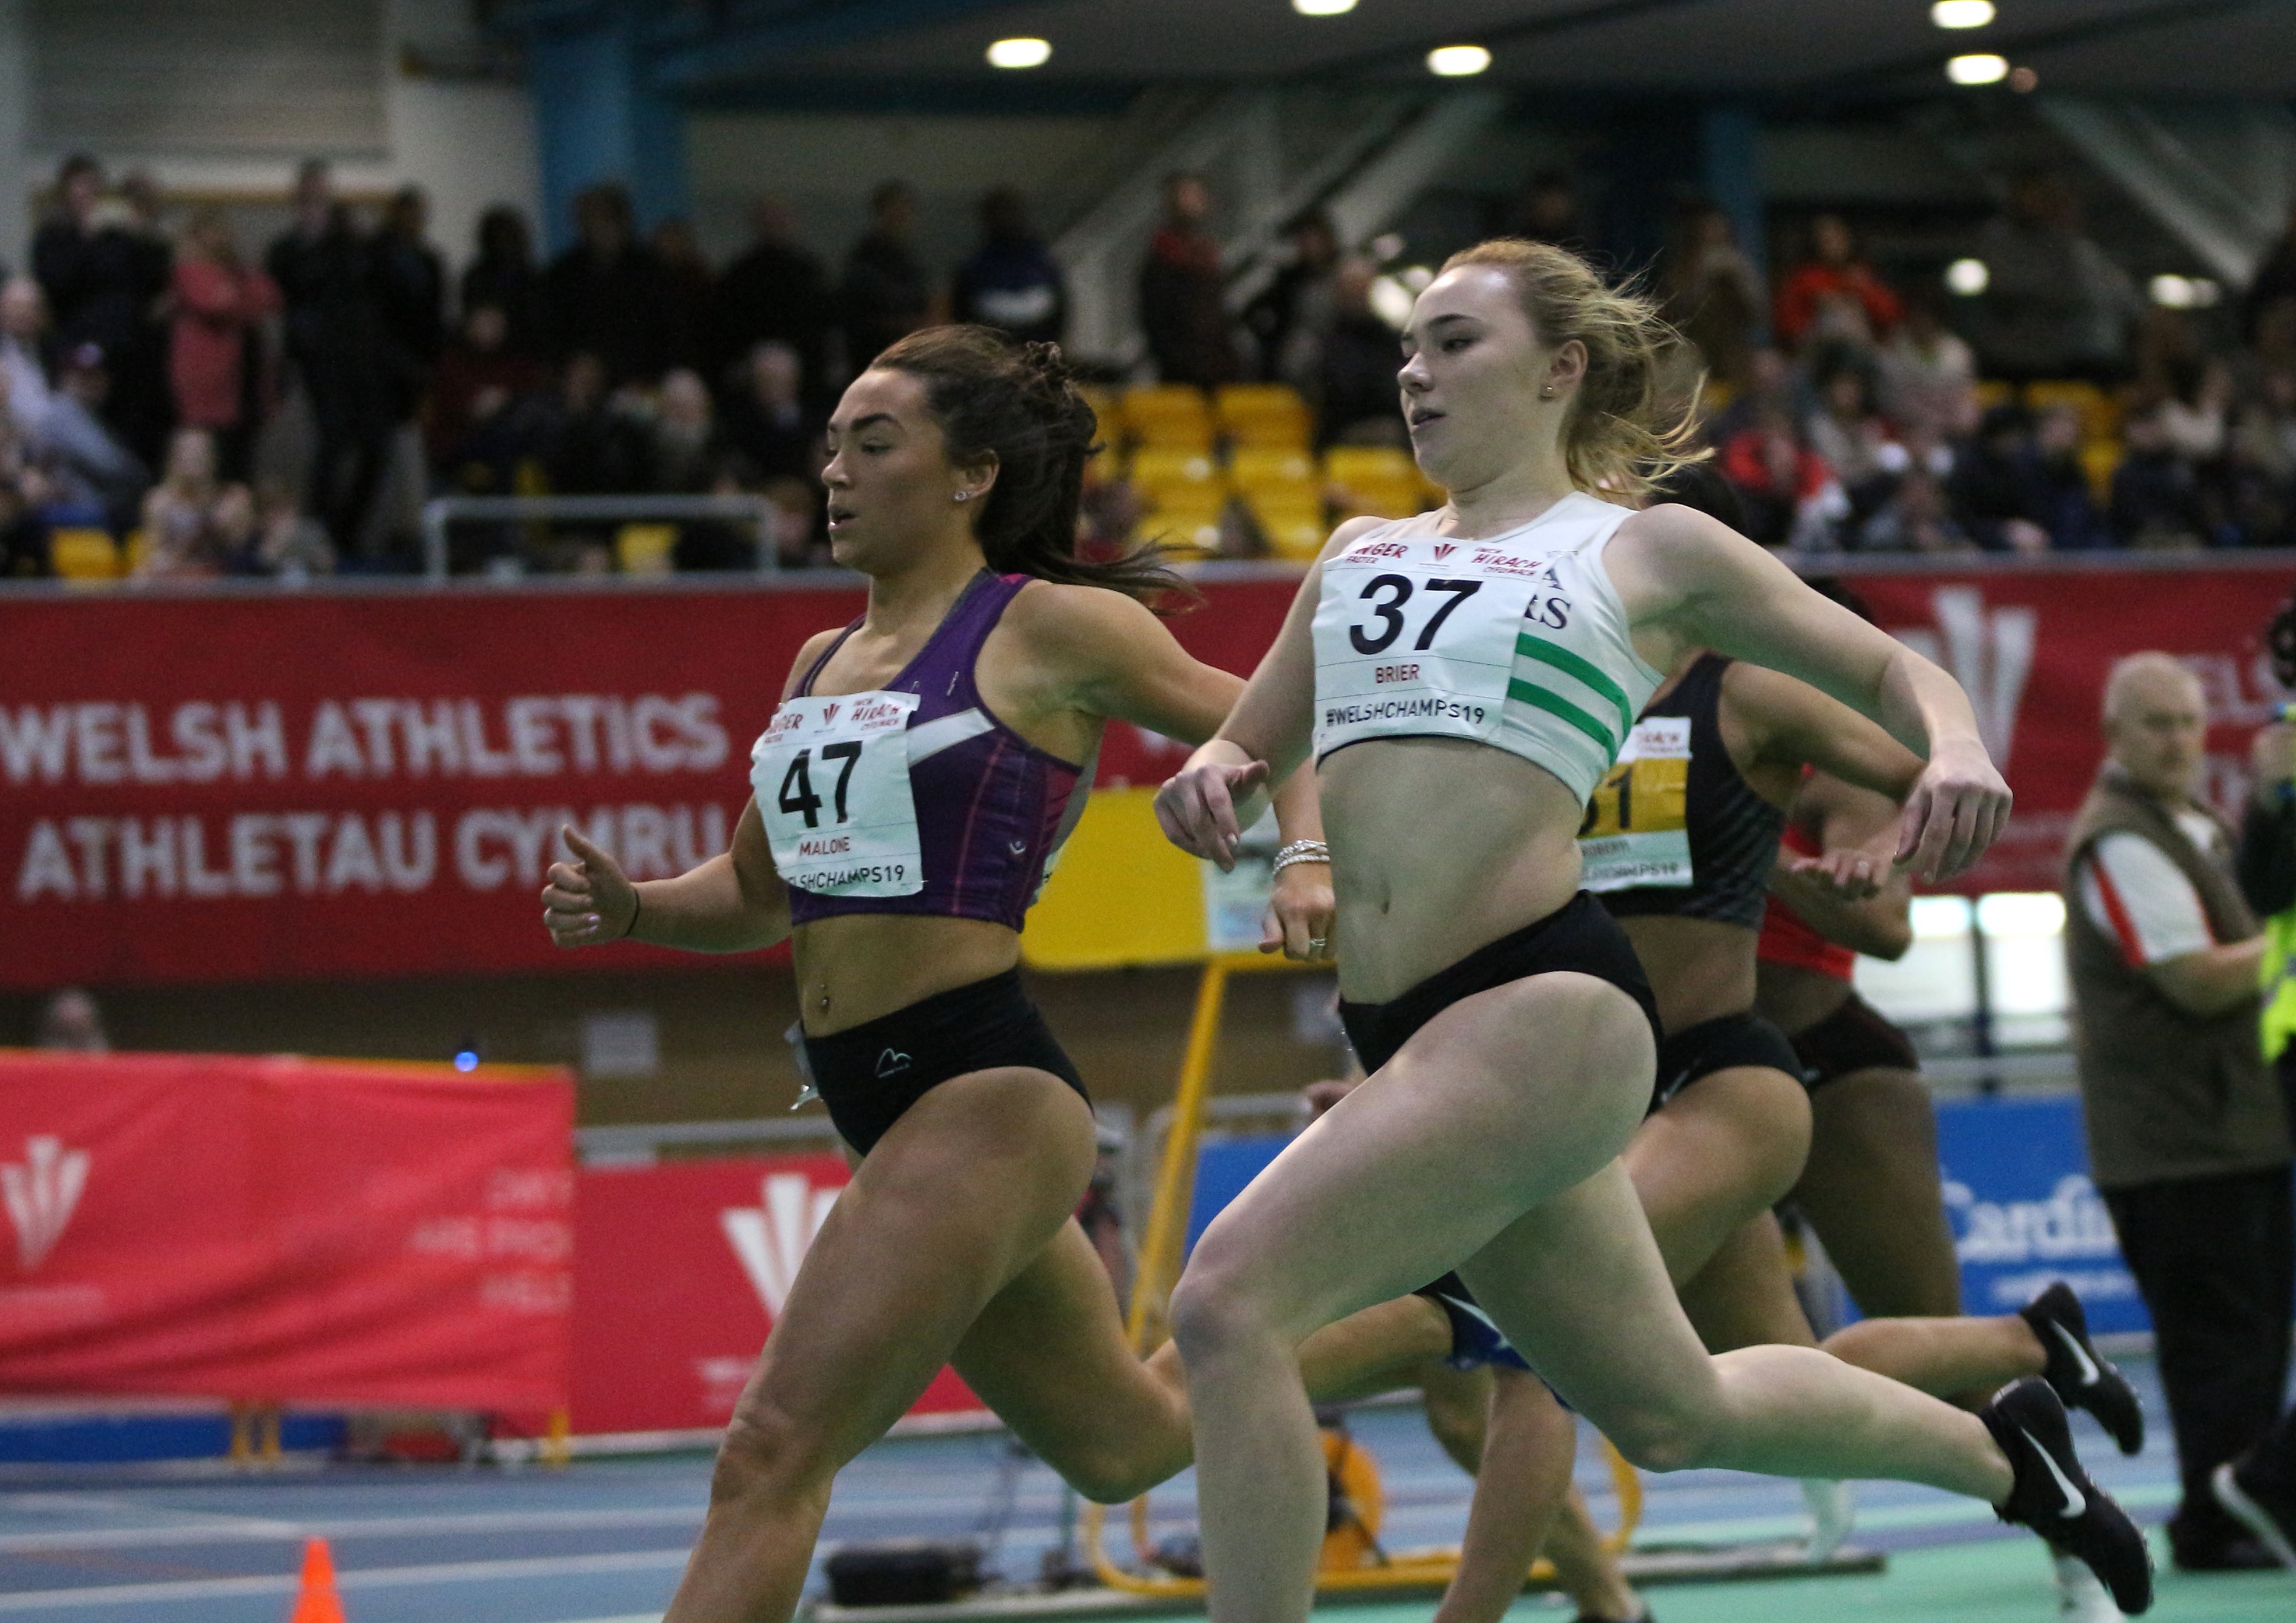 Shannon Malone Sprints To Victory On Day Of Dead-Heats, Disqualifications And Drama At Welsh Indoor Champs